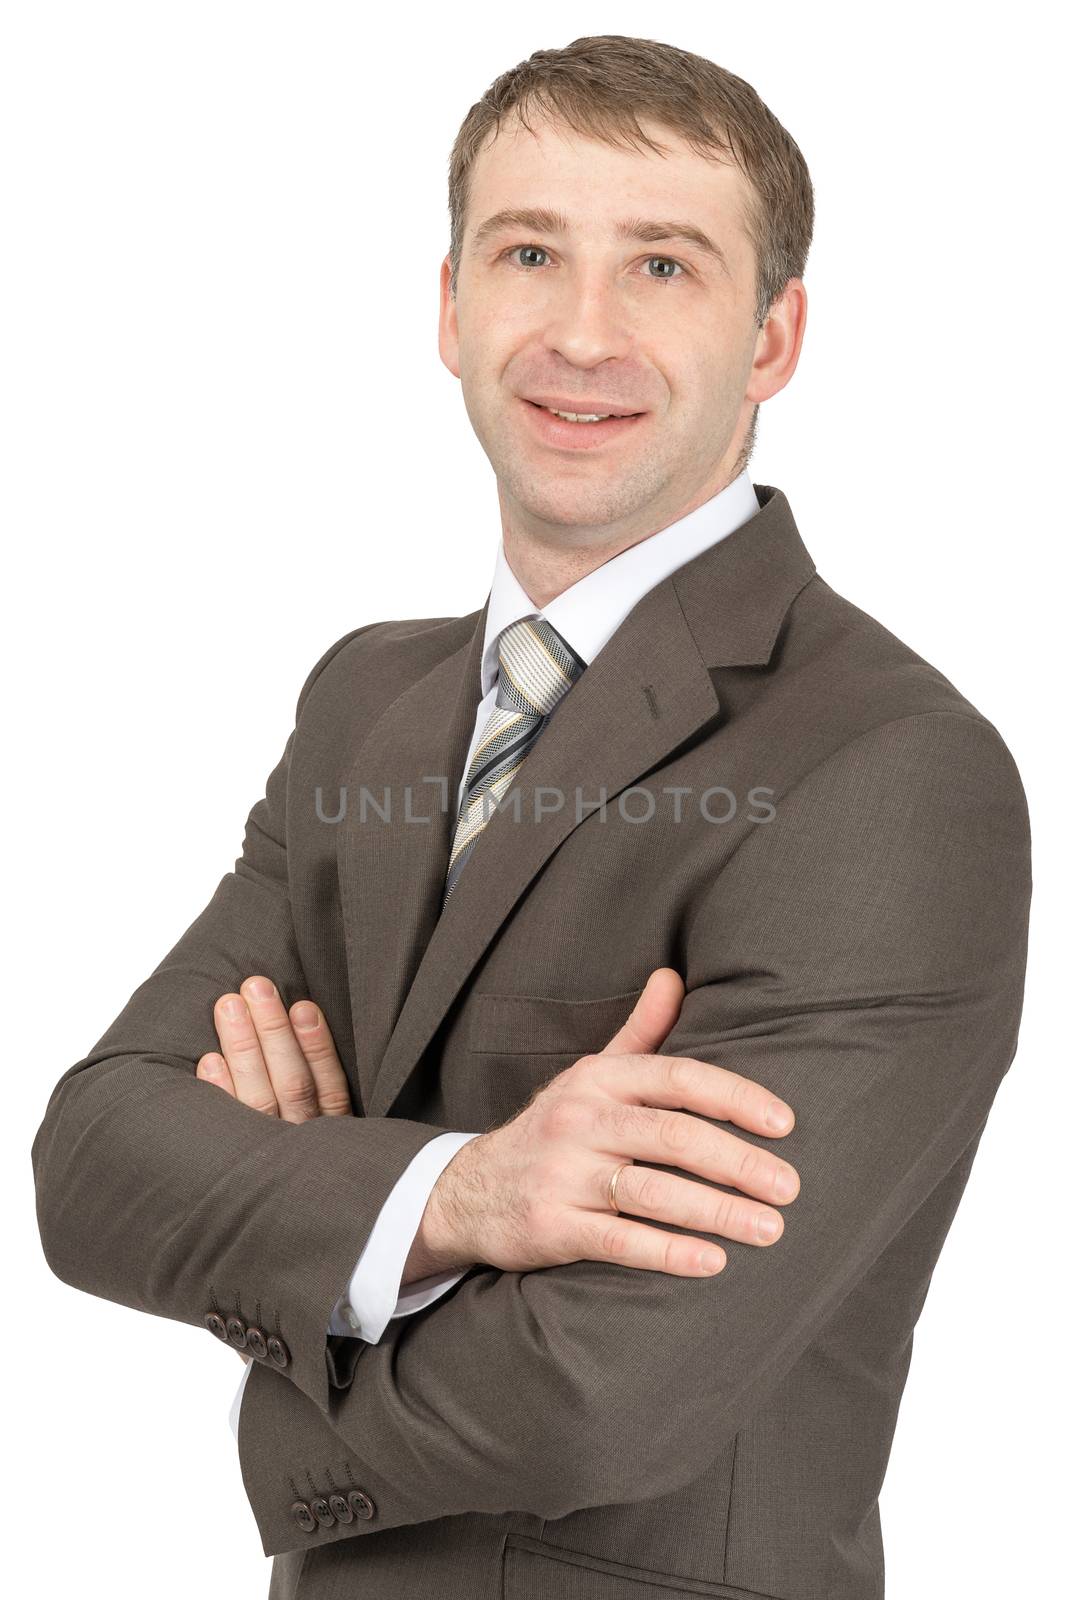 Businessman with teeth smile looking at camera isolated on white background